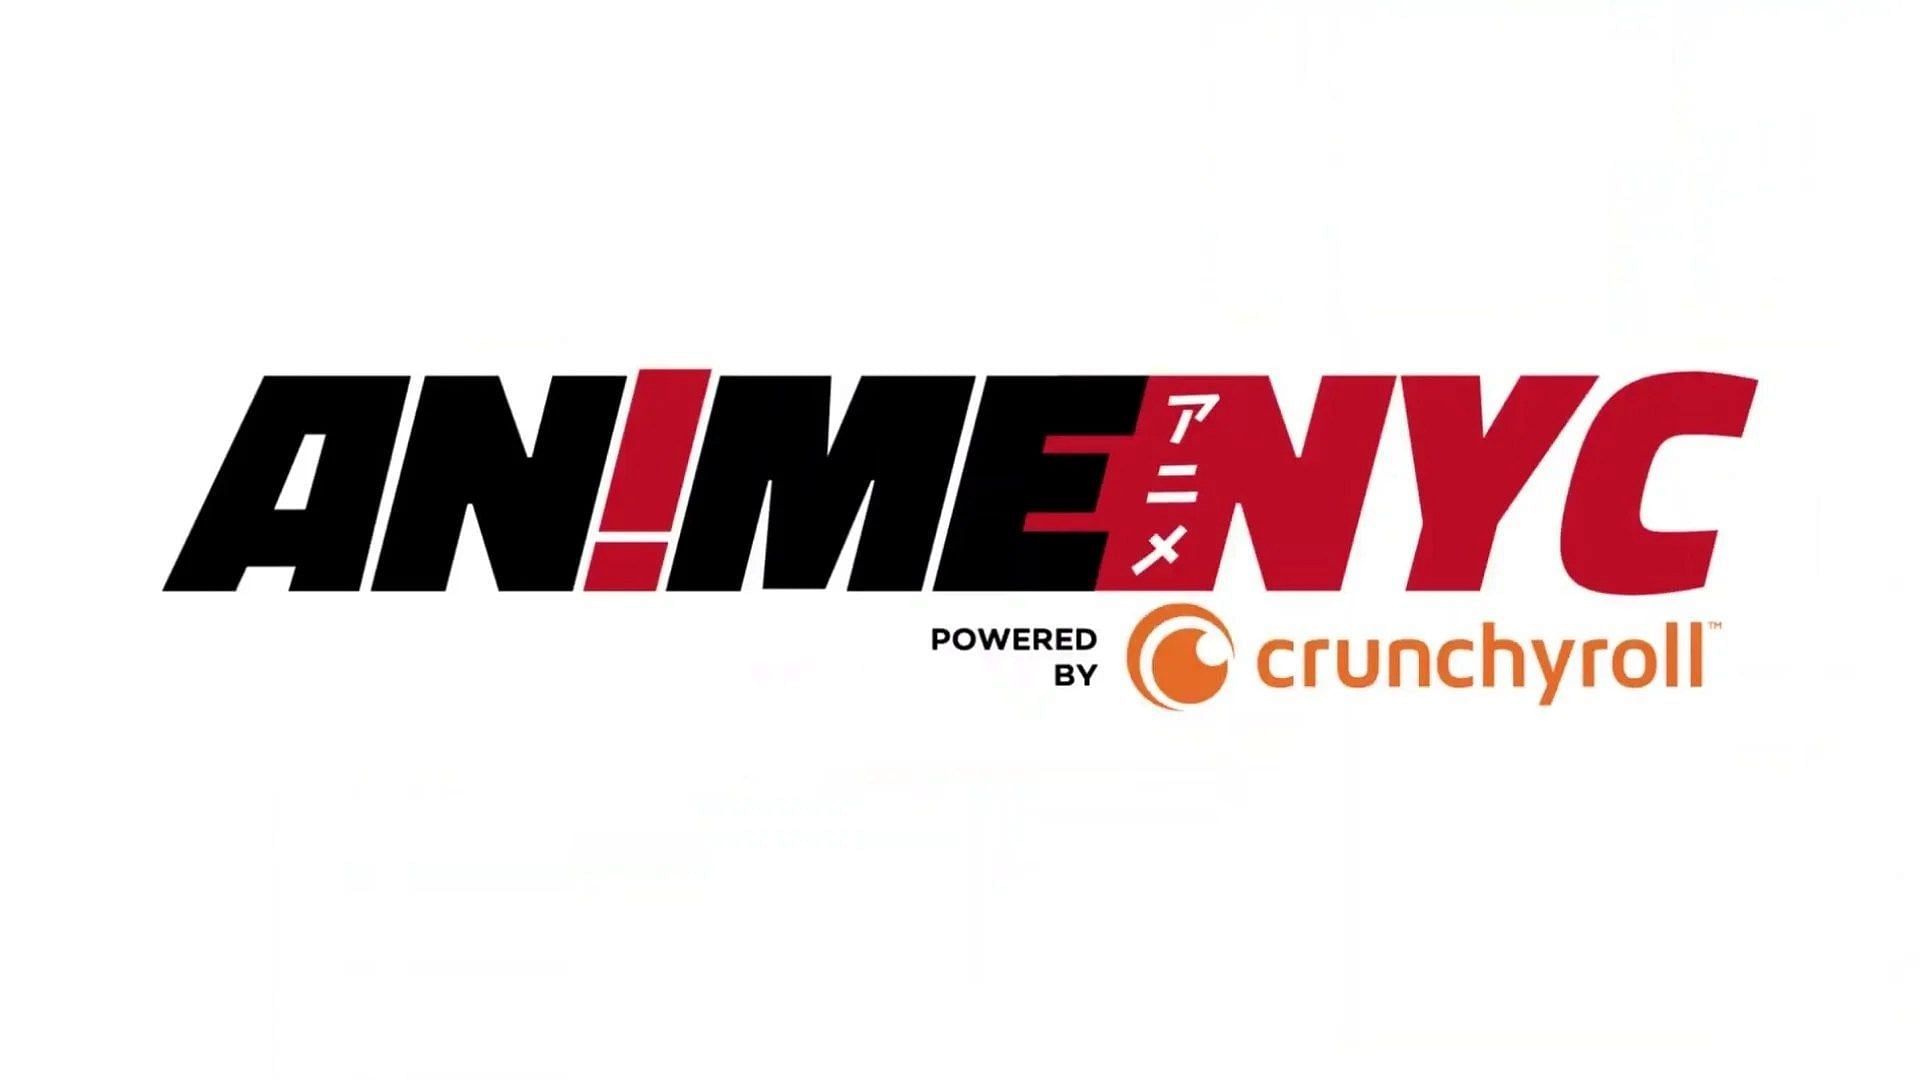 Crunchyroll Heads to Anime NYC with Biggest Celebration Ever